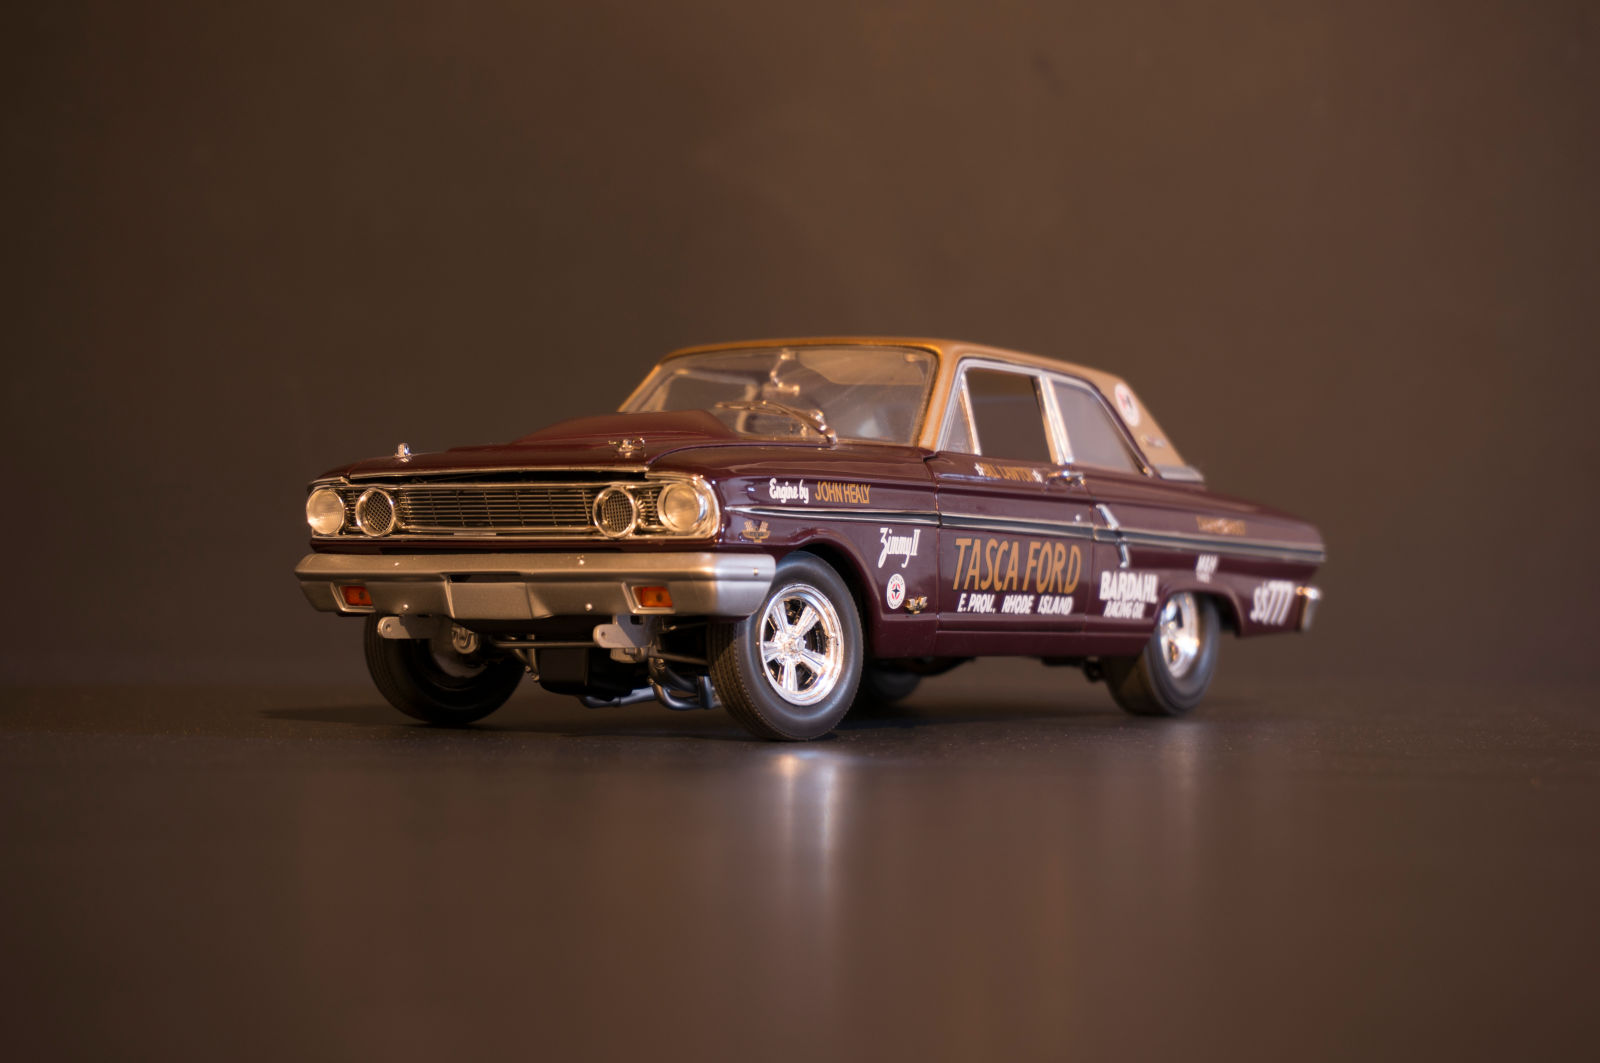 Illustration for article titled Week of 1:18 #2: Ford Fairlane Thunderbolt